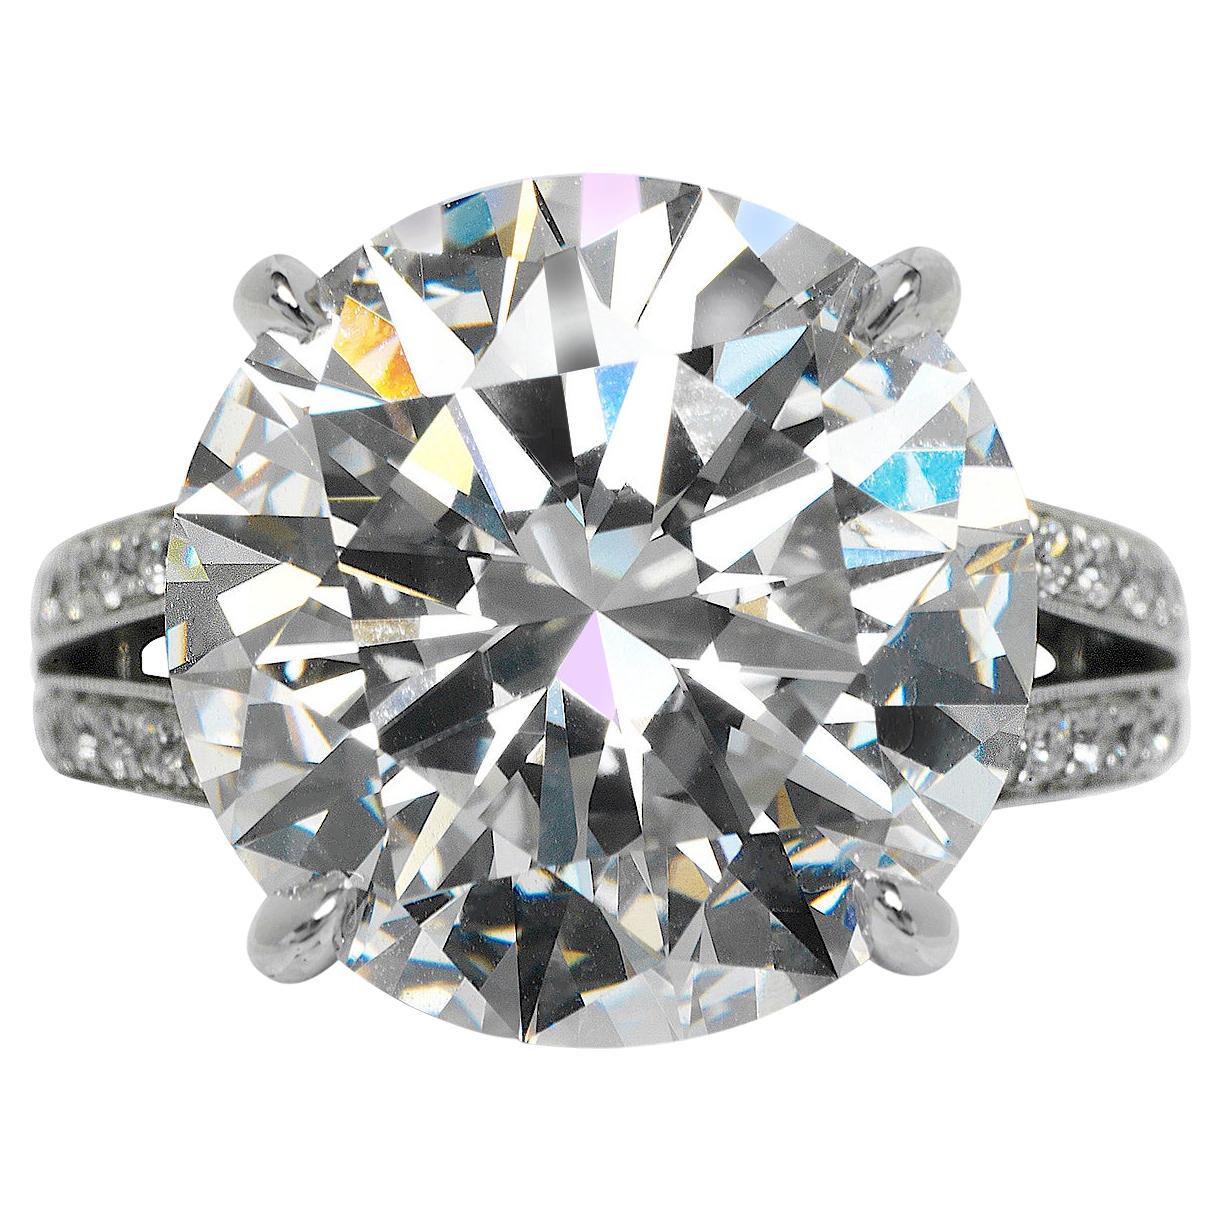 12 Carat Internally Flawless Diamond Engagement Ring GIA Certified E Color For Sale